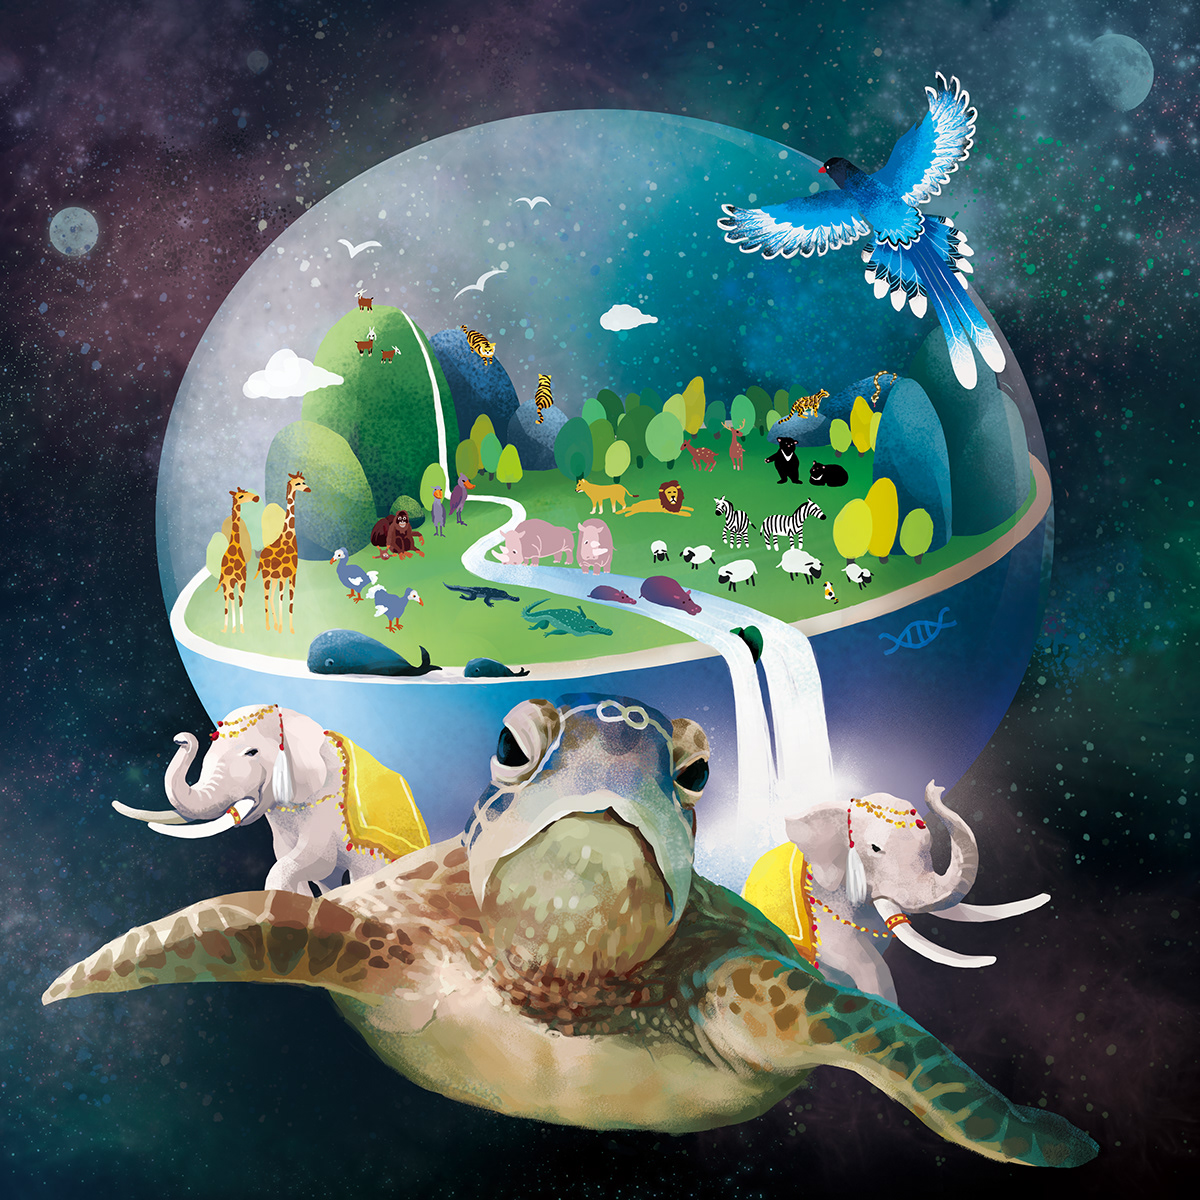 earth day animal green Nature earth Ecology world Turtle Space  fantasy